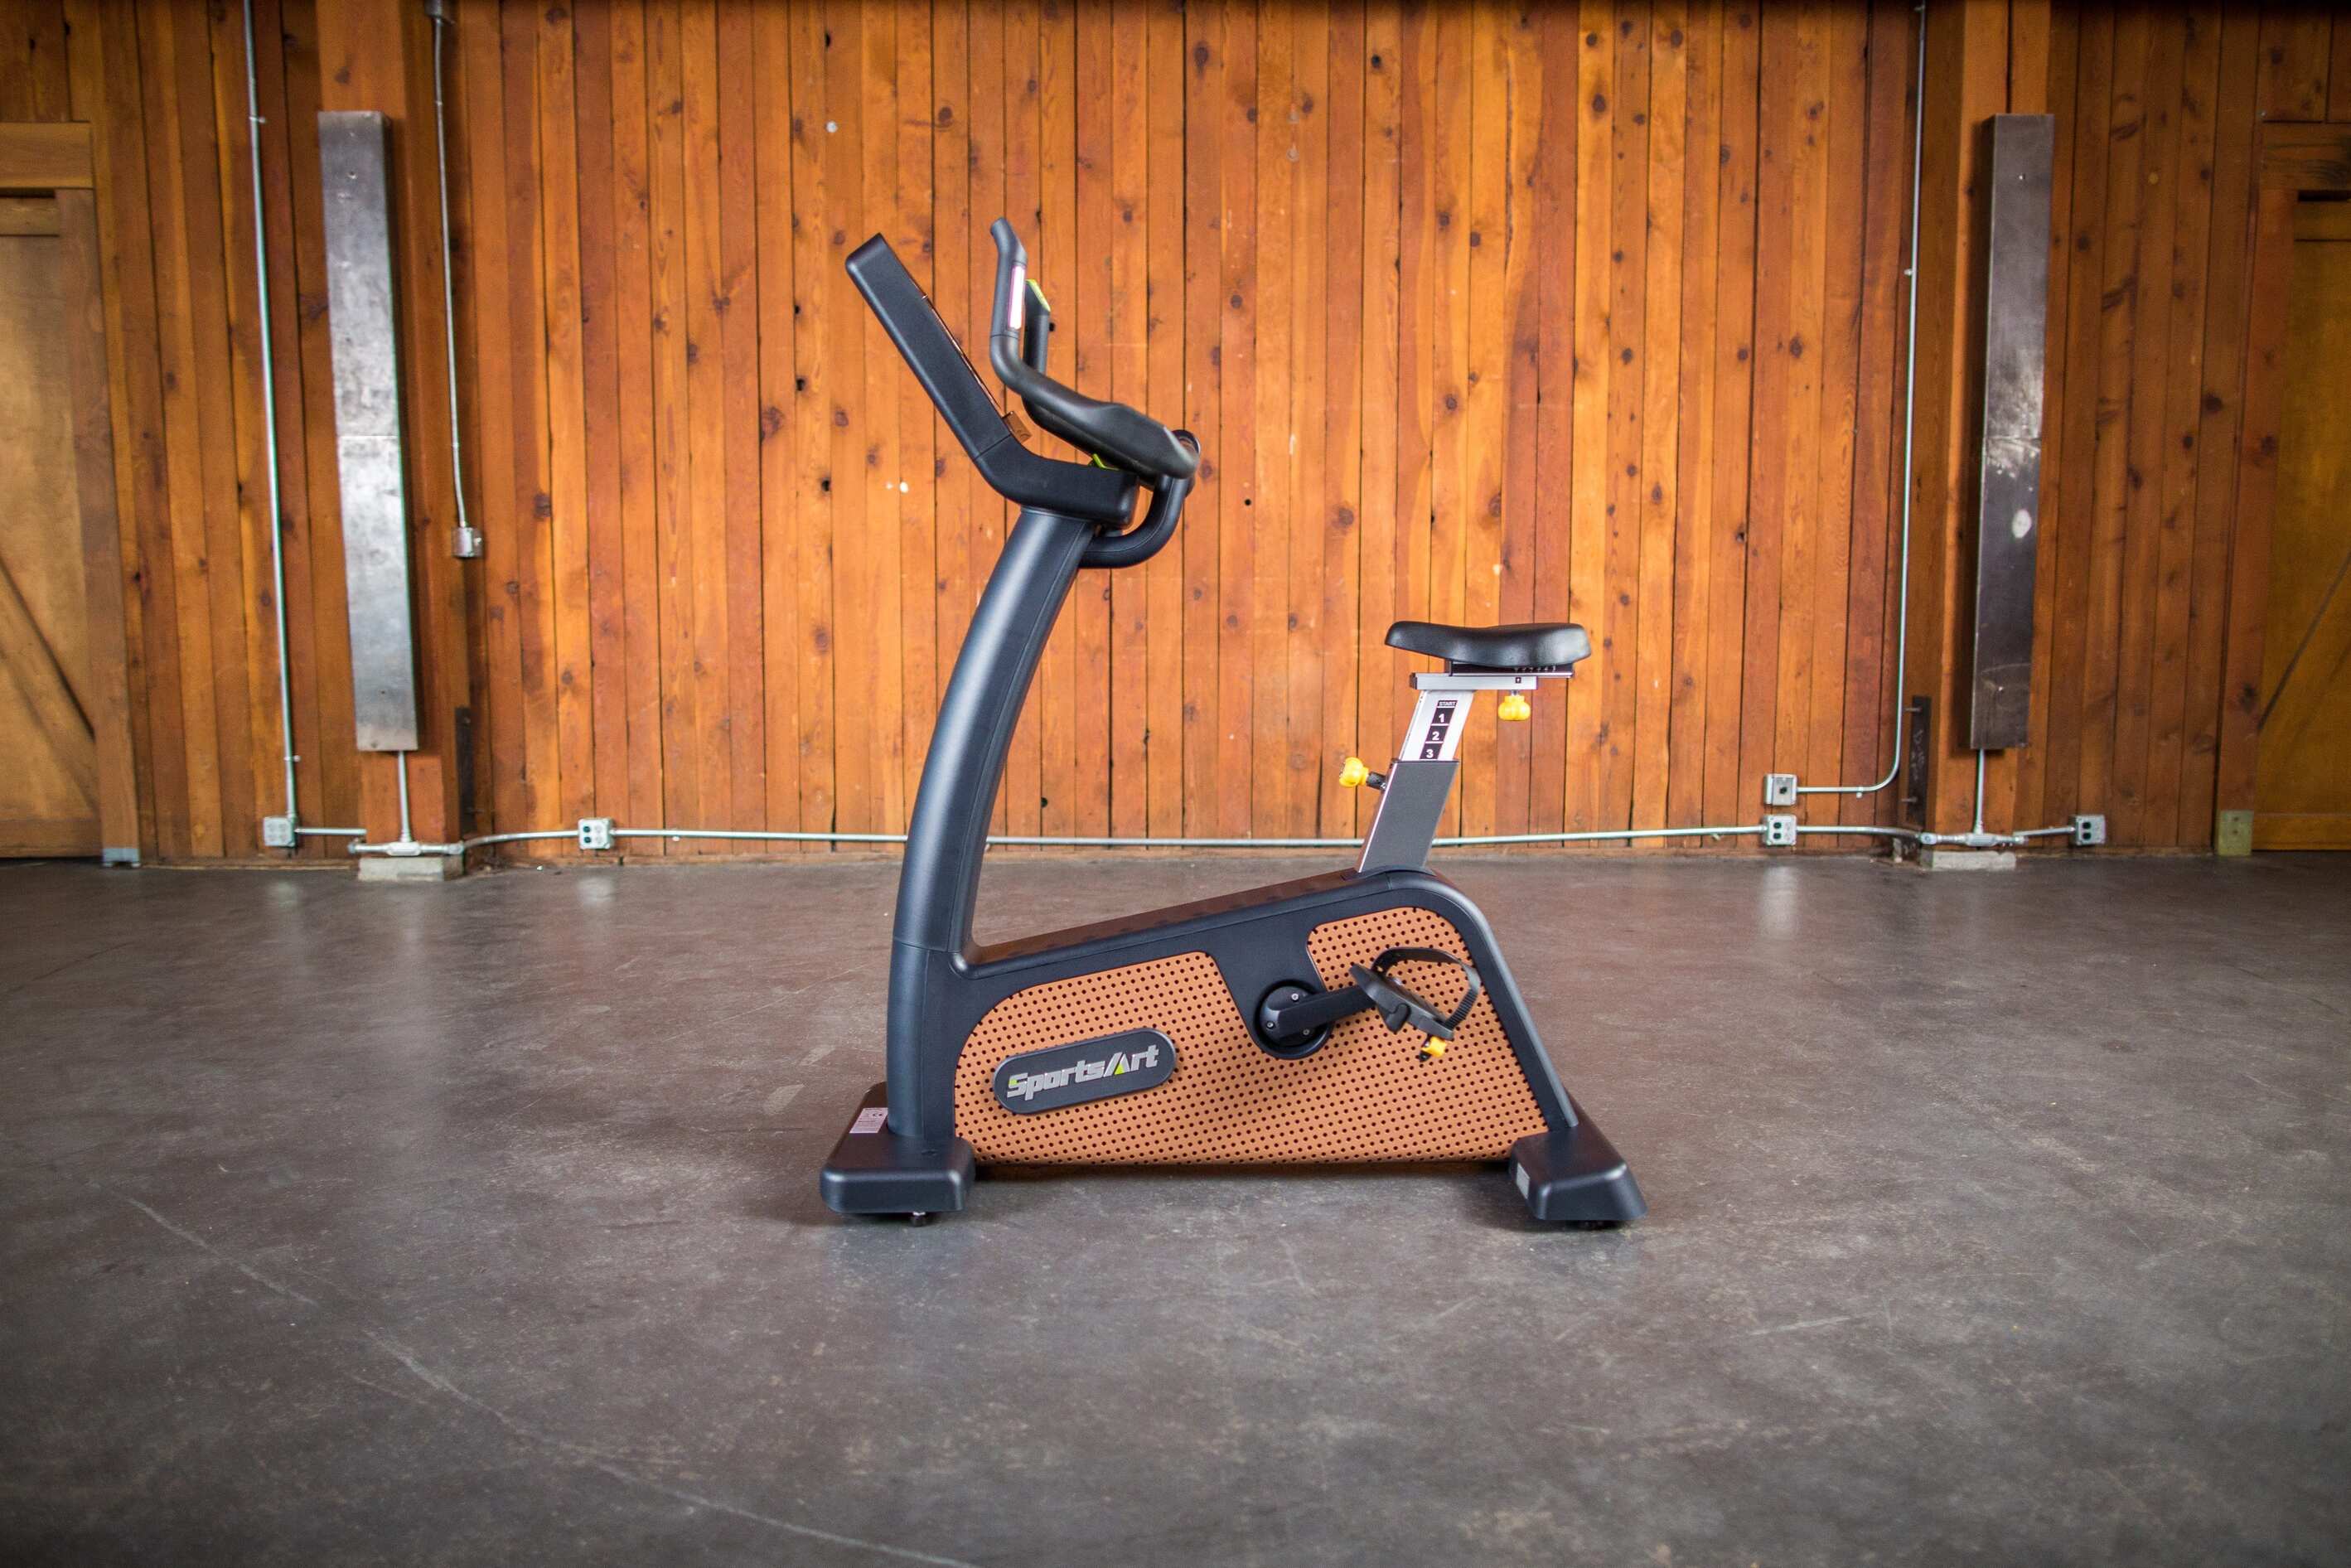 SportsArts Status Eco-Natural Upright Cycle C576U side view inside a home gym setting